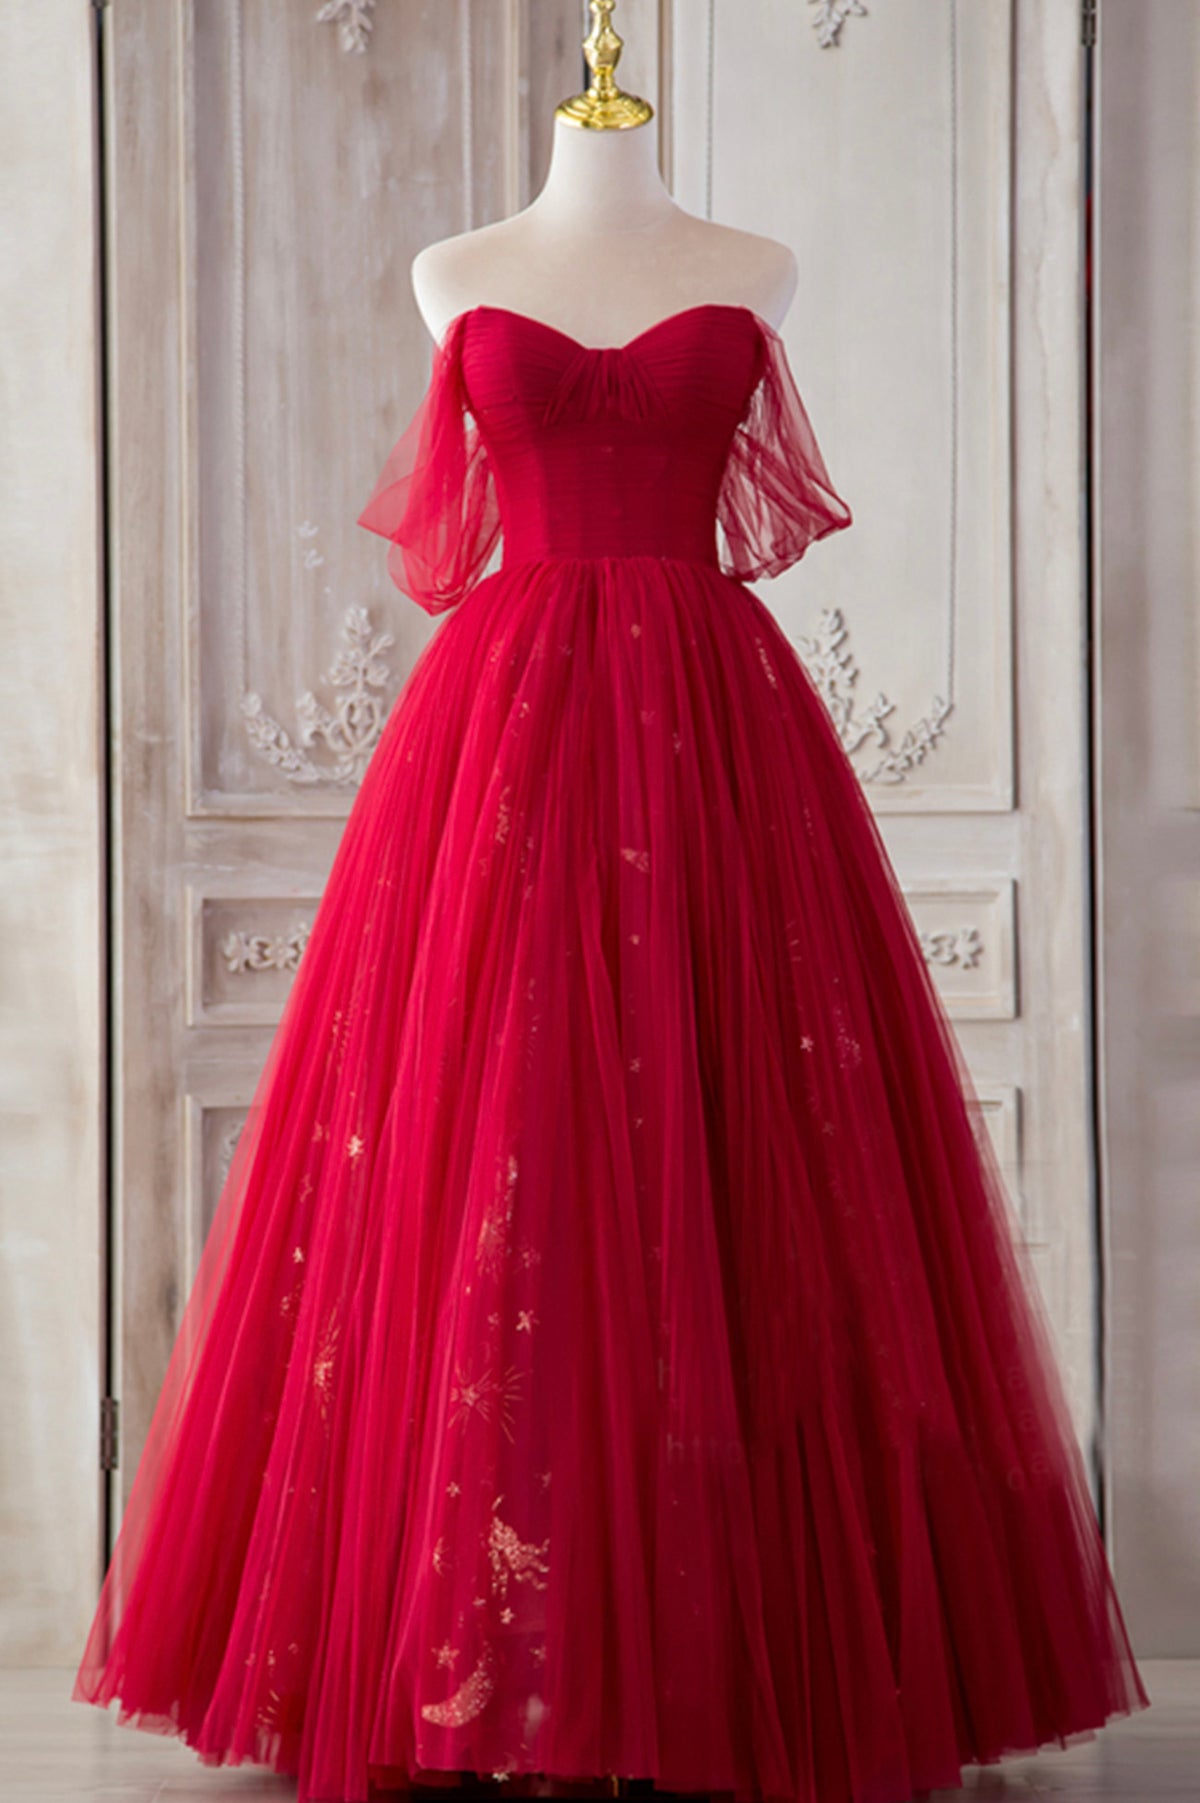 The Red Strapless Tulle Long A-Line Prom Dress is a showstopper. With its off-the-shoulder design and A-line silhouette, it perfectly blends elegance and allure.